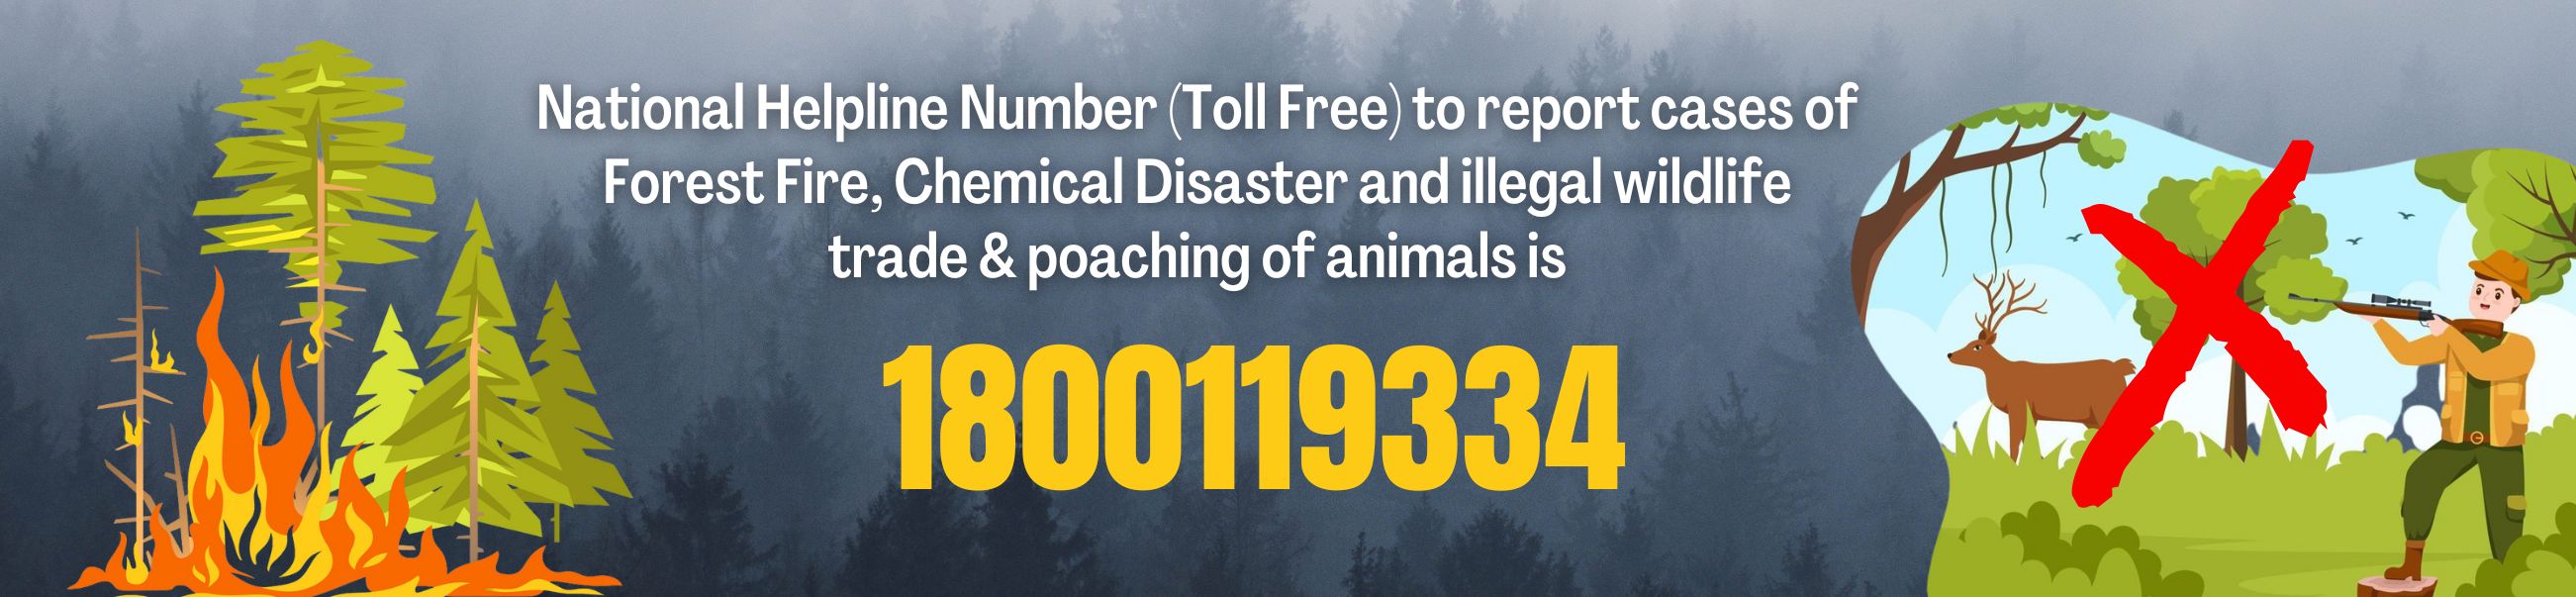 Banner-Number (Toll Free) to report cases of Forest Fire, Chemical Disaster and illegal trade & poaching of animals